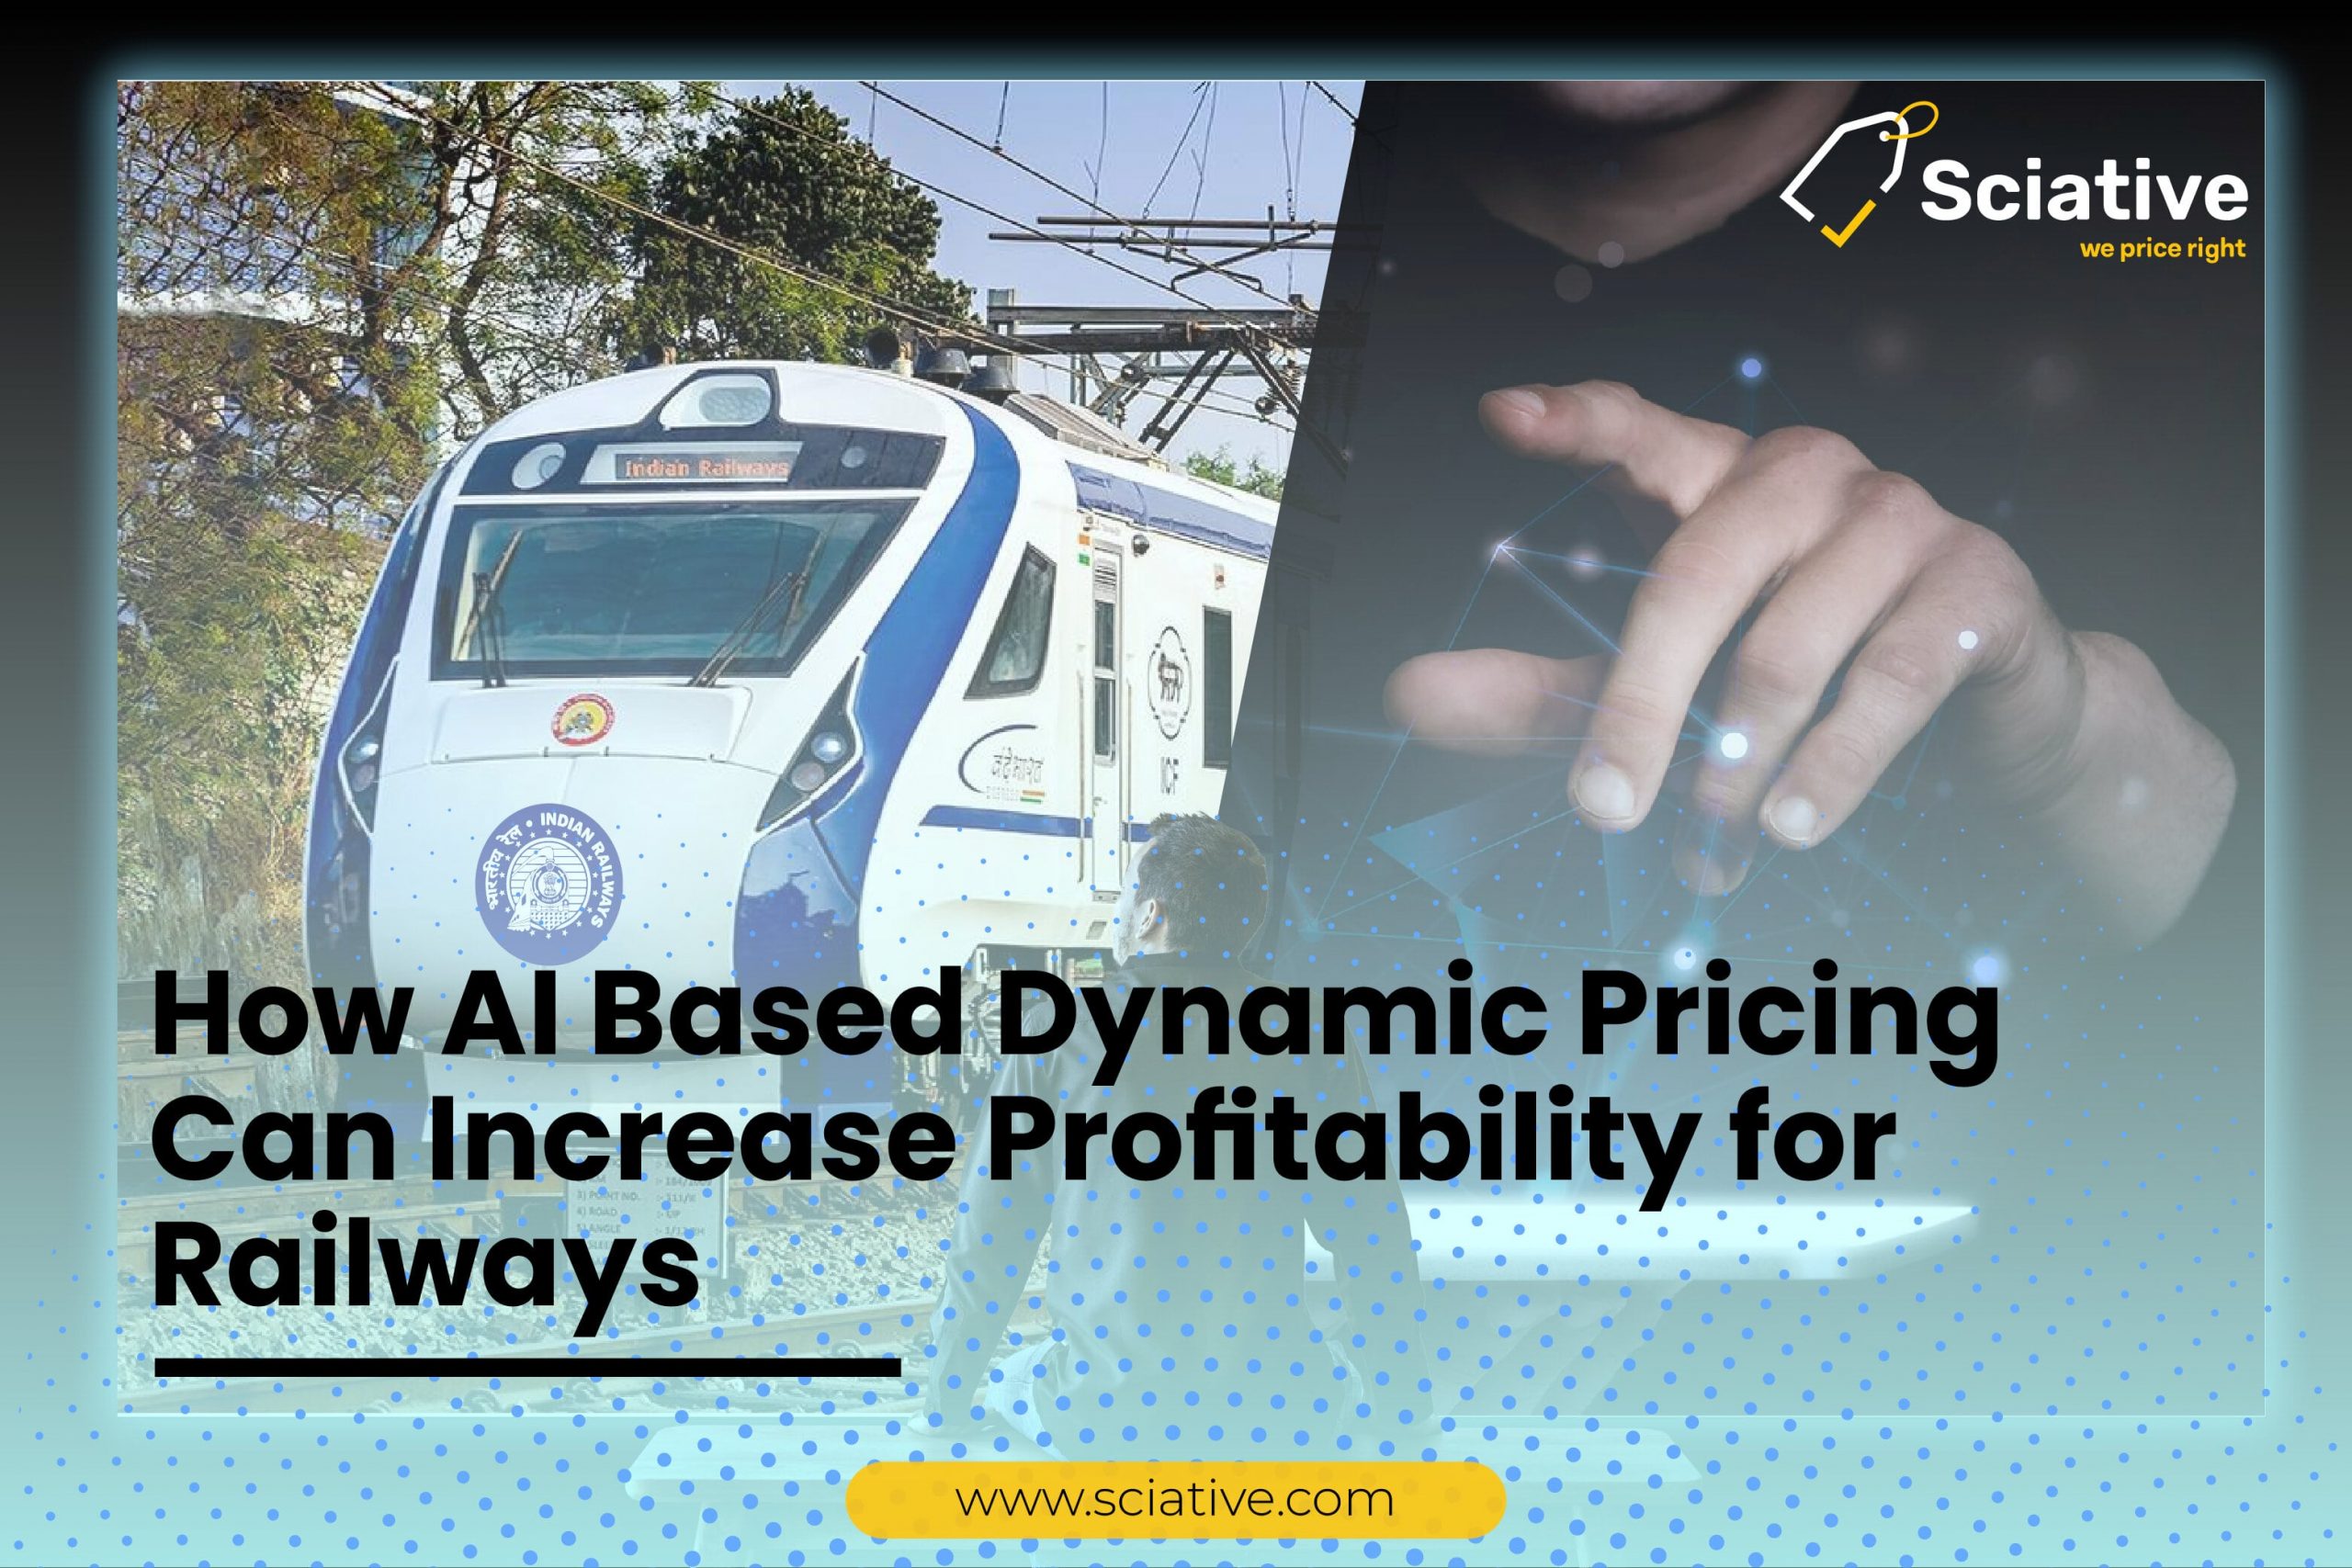 How Dynamic Pricing Can Increase Profitability for Railways